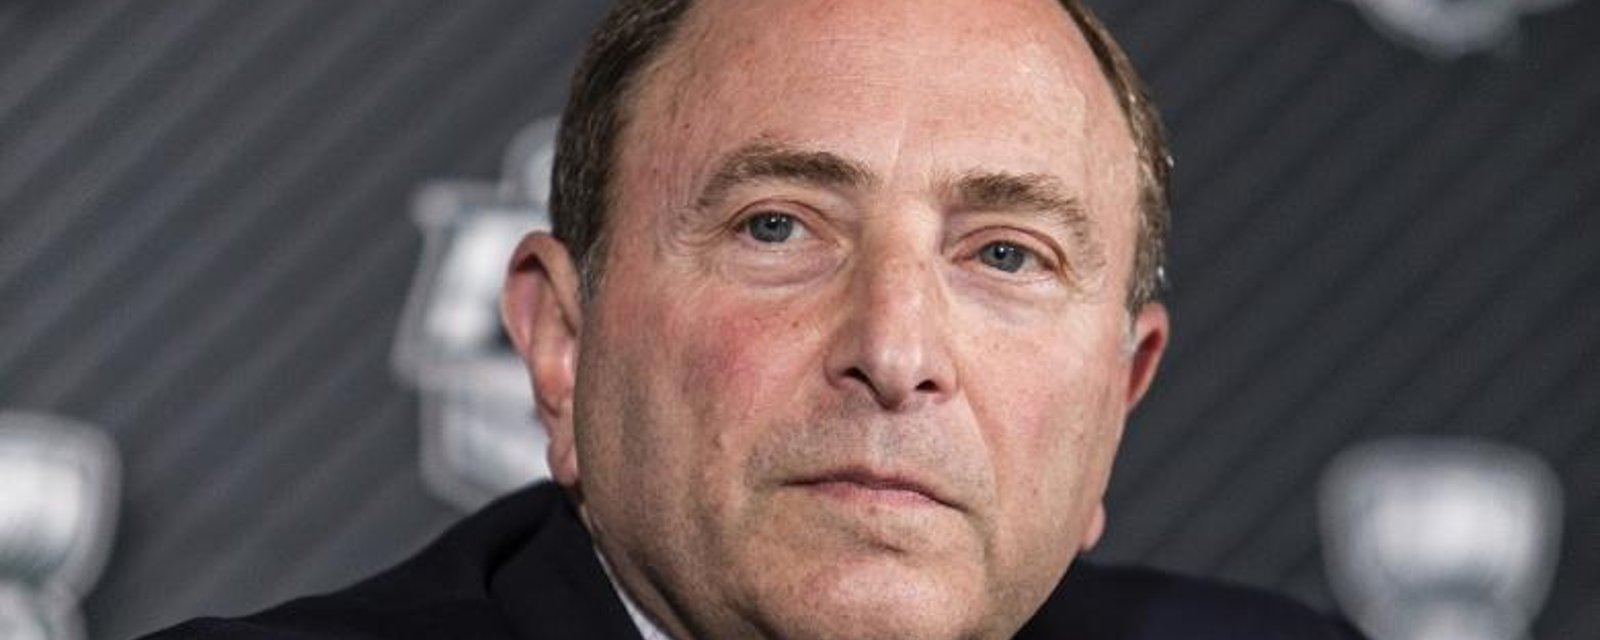 Breaking: NHL expansion may have hit a major roadblock.